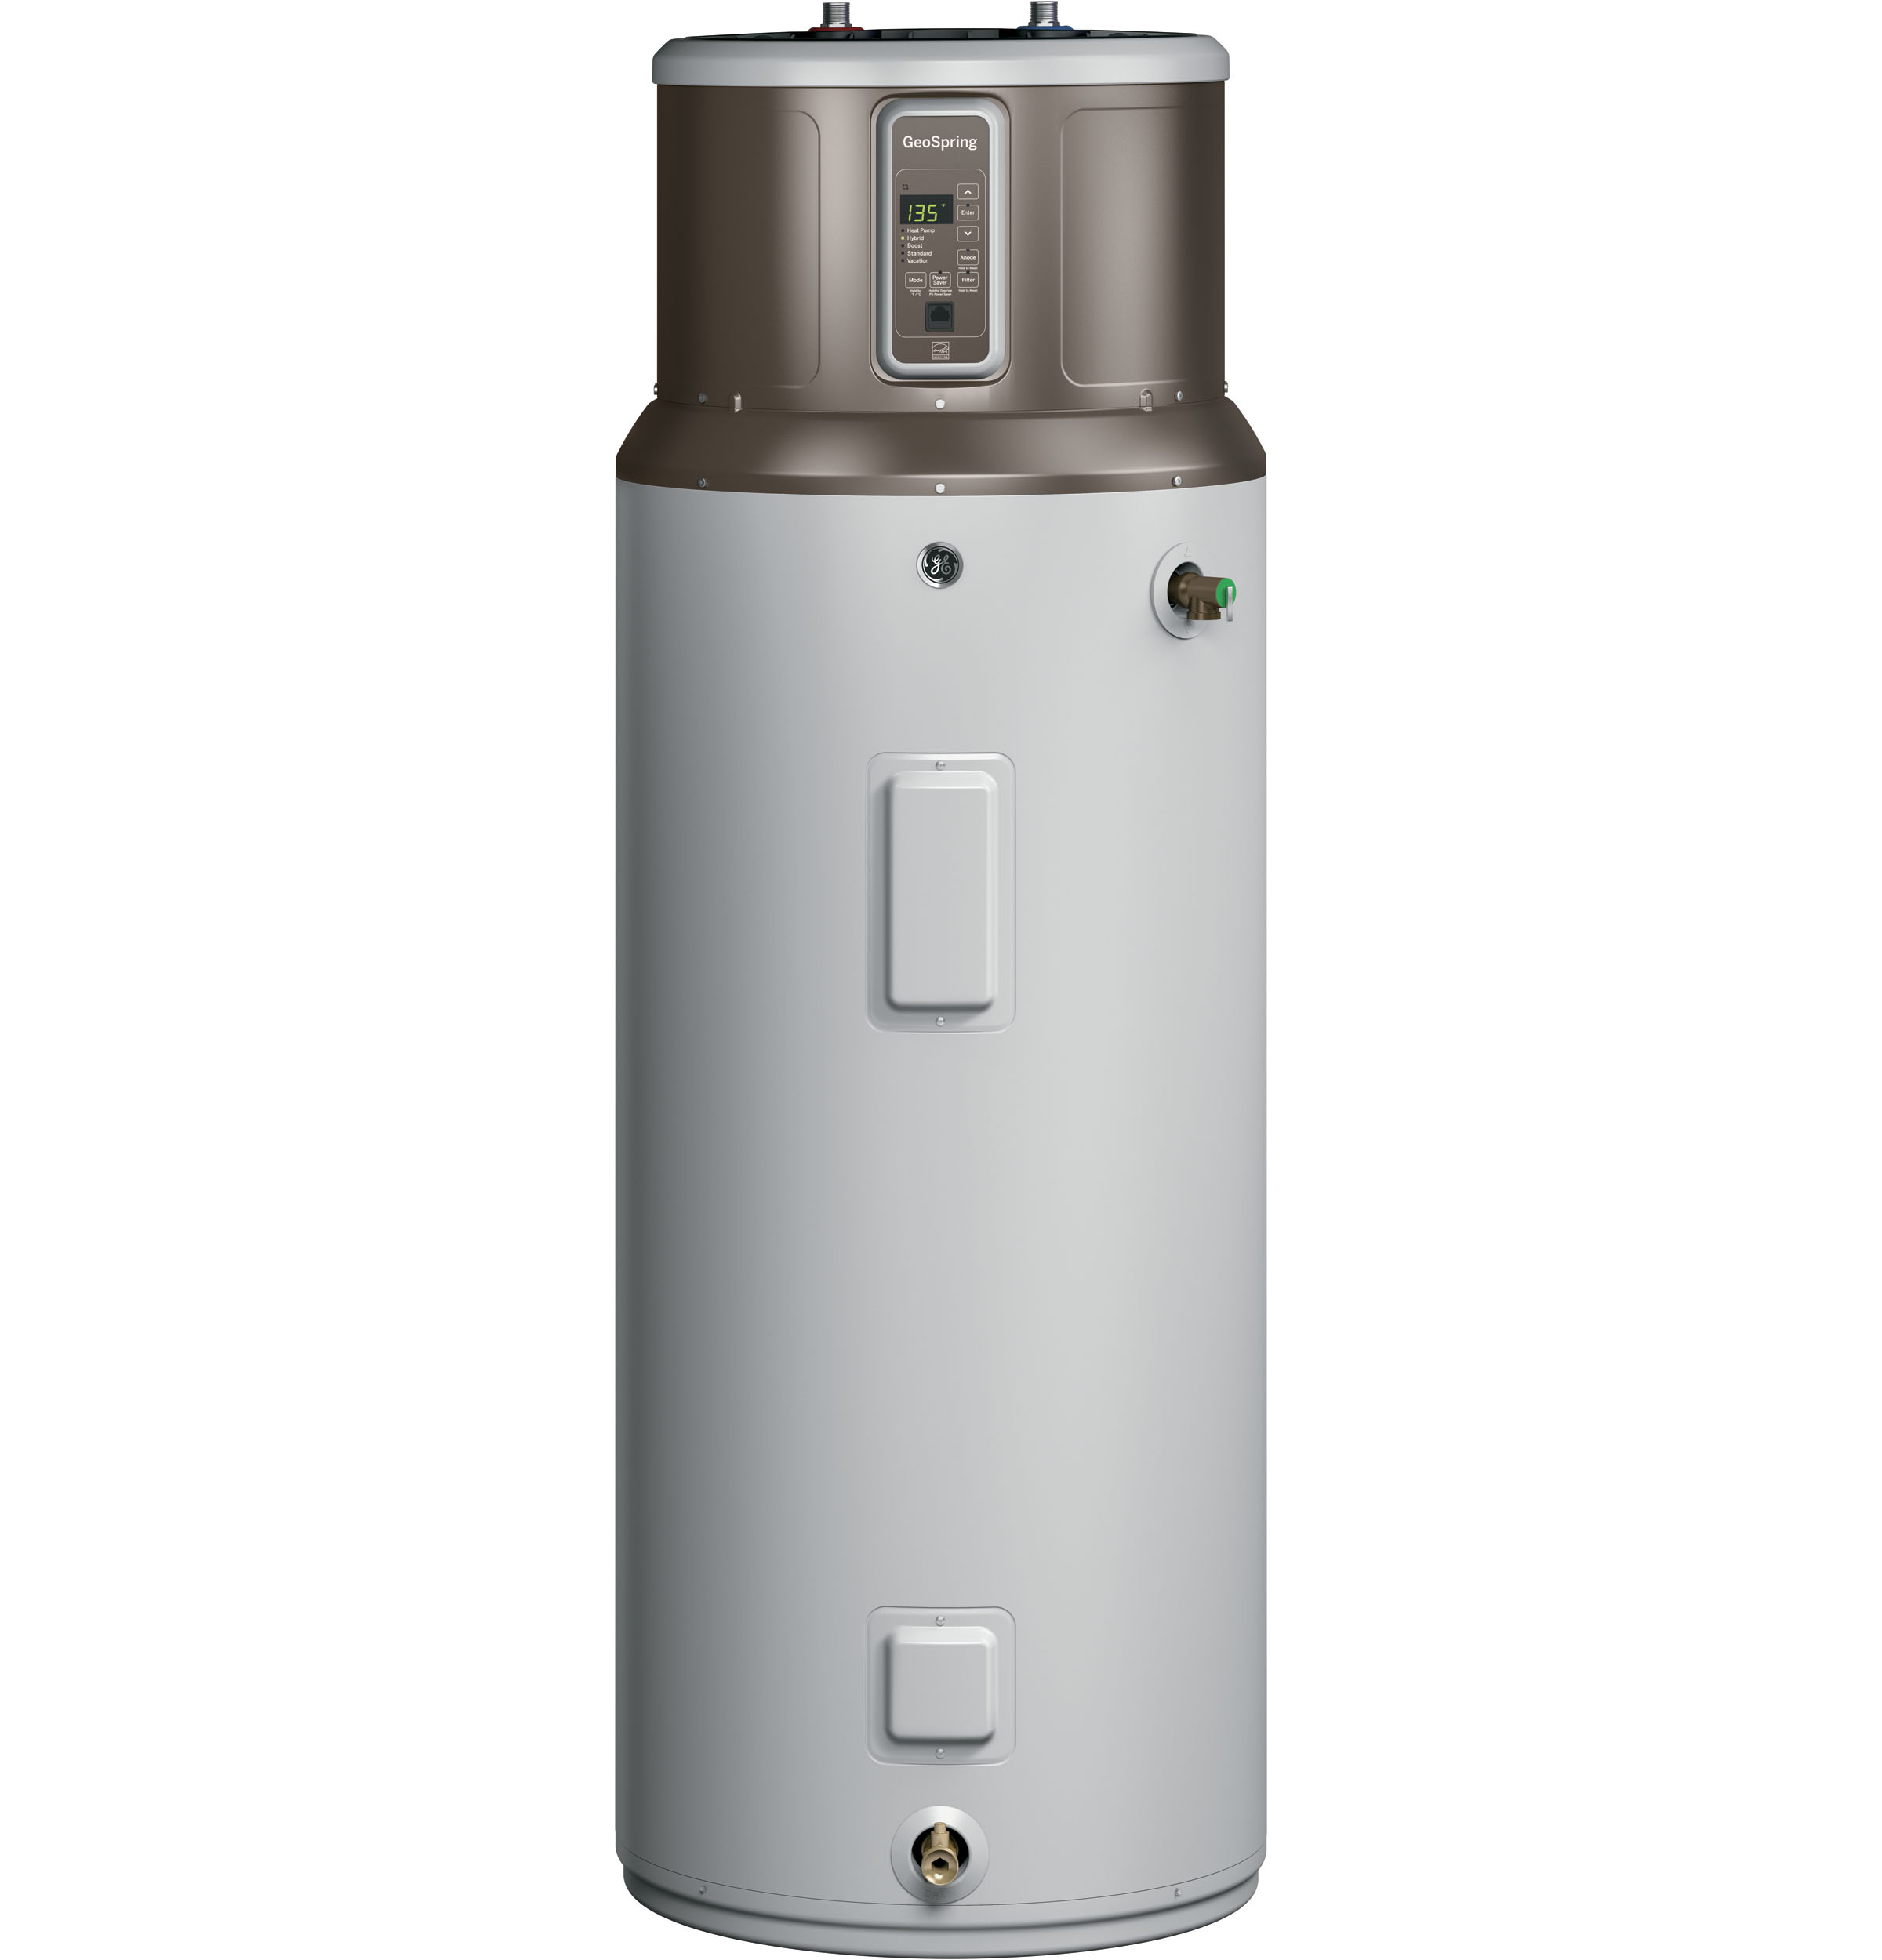 GeoSpring™ Pro hybrid electric water heater